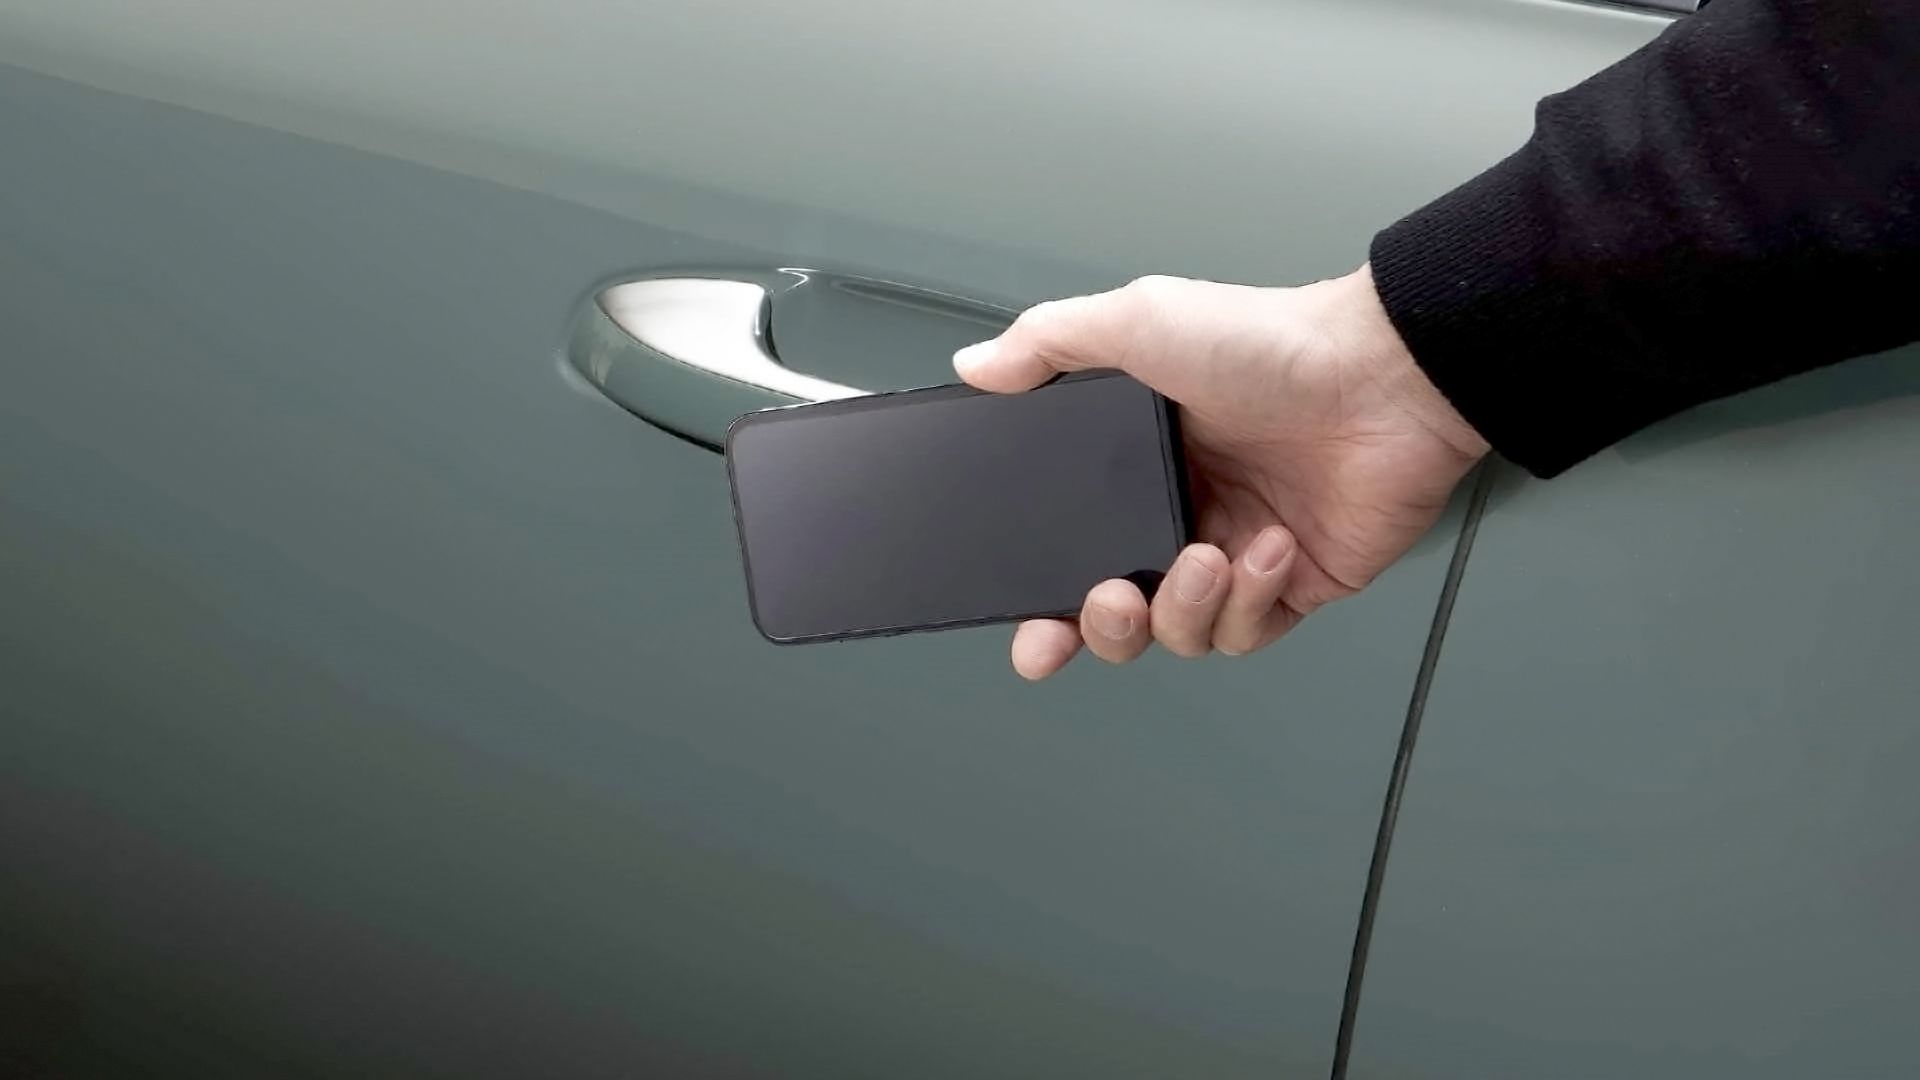 Using an Android digital car key with a Kia.